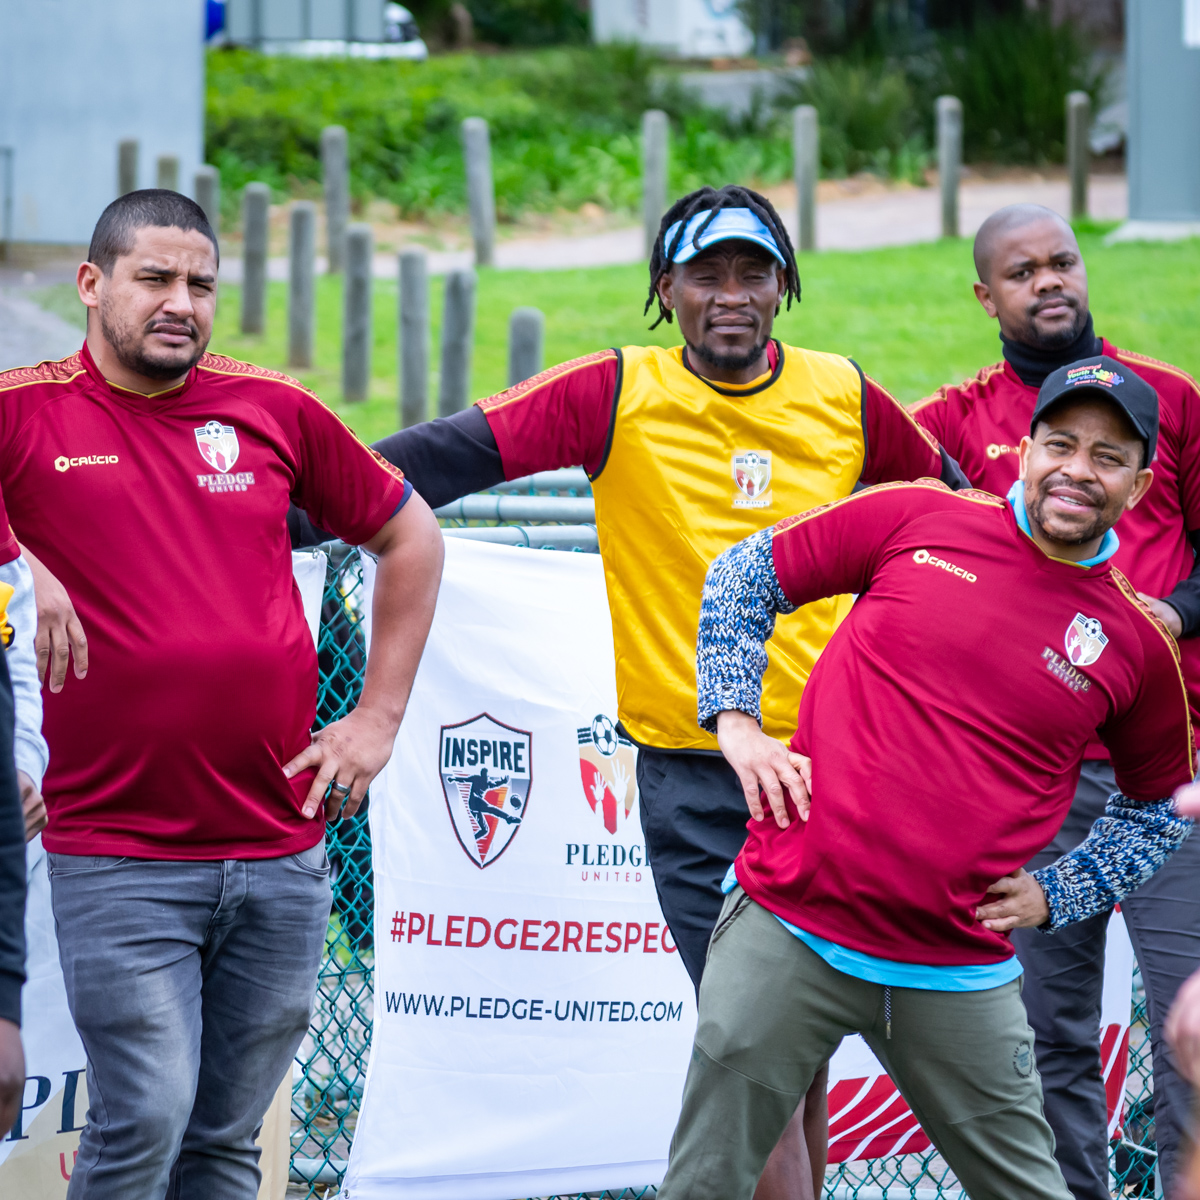 Day 2 of the @pledge_united workshop with @inspireindo in #Stellenbosch had coaches learning more about #safeguarding + practical ways to address #genderbasedviolence through #football! #pledge2respect #morethansport #football4good